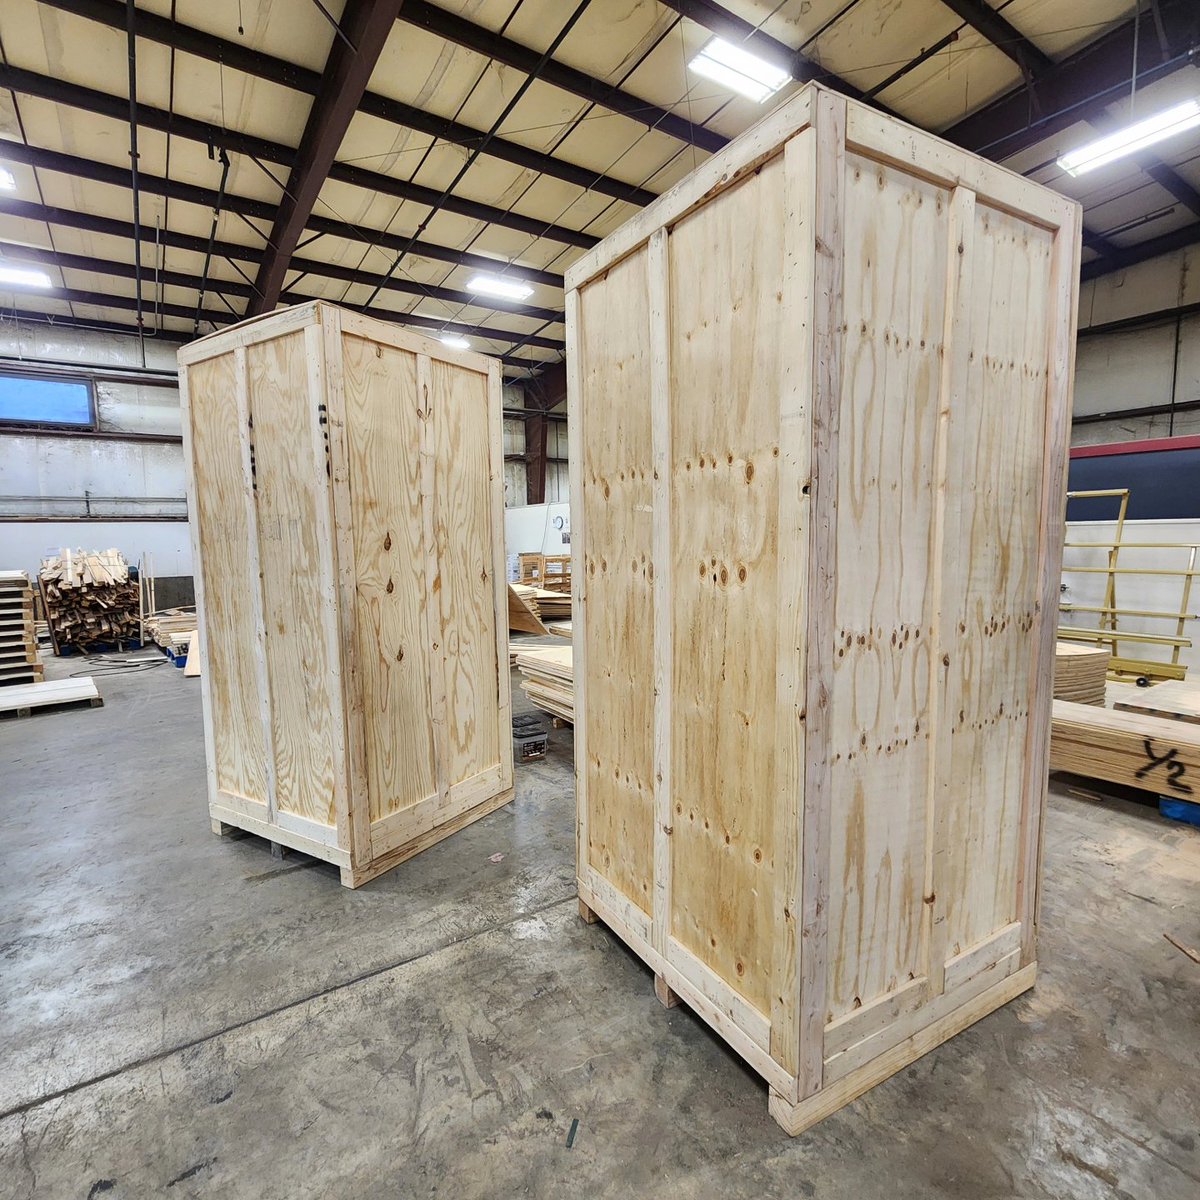 How about a tall crate? We've got those too! 🔝 Reach out to us today to elevate your shipping solutions! #custom #crating #shippingsolutions